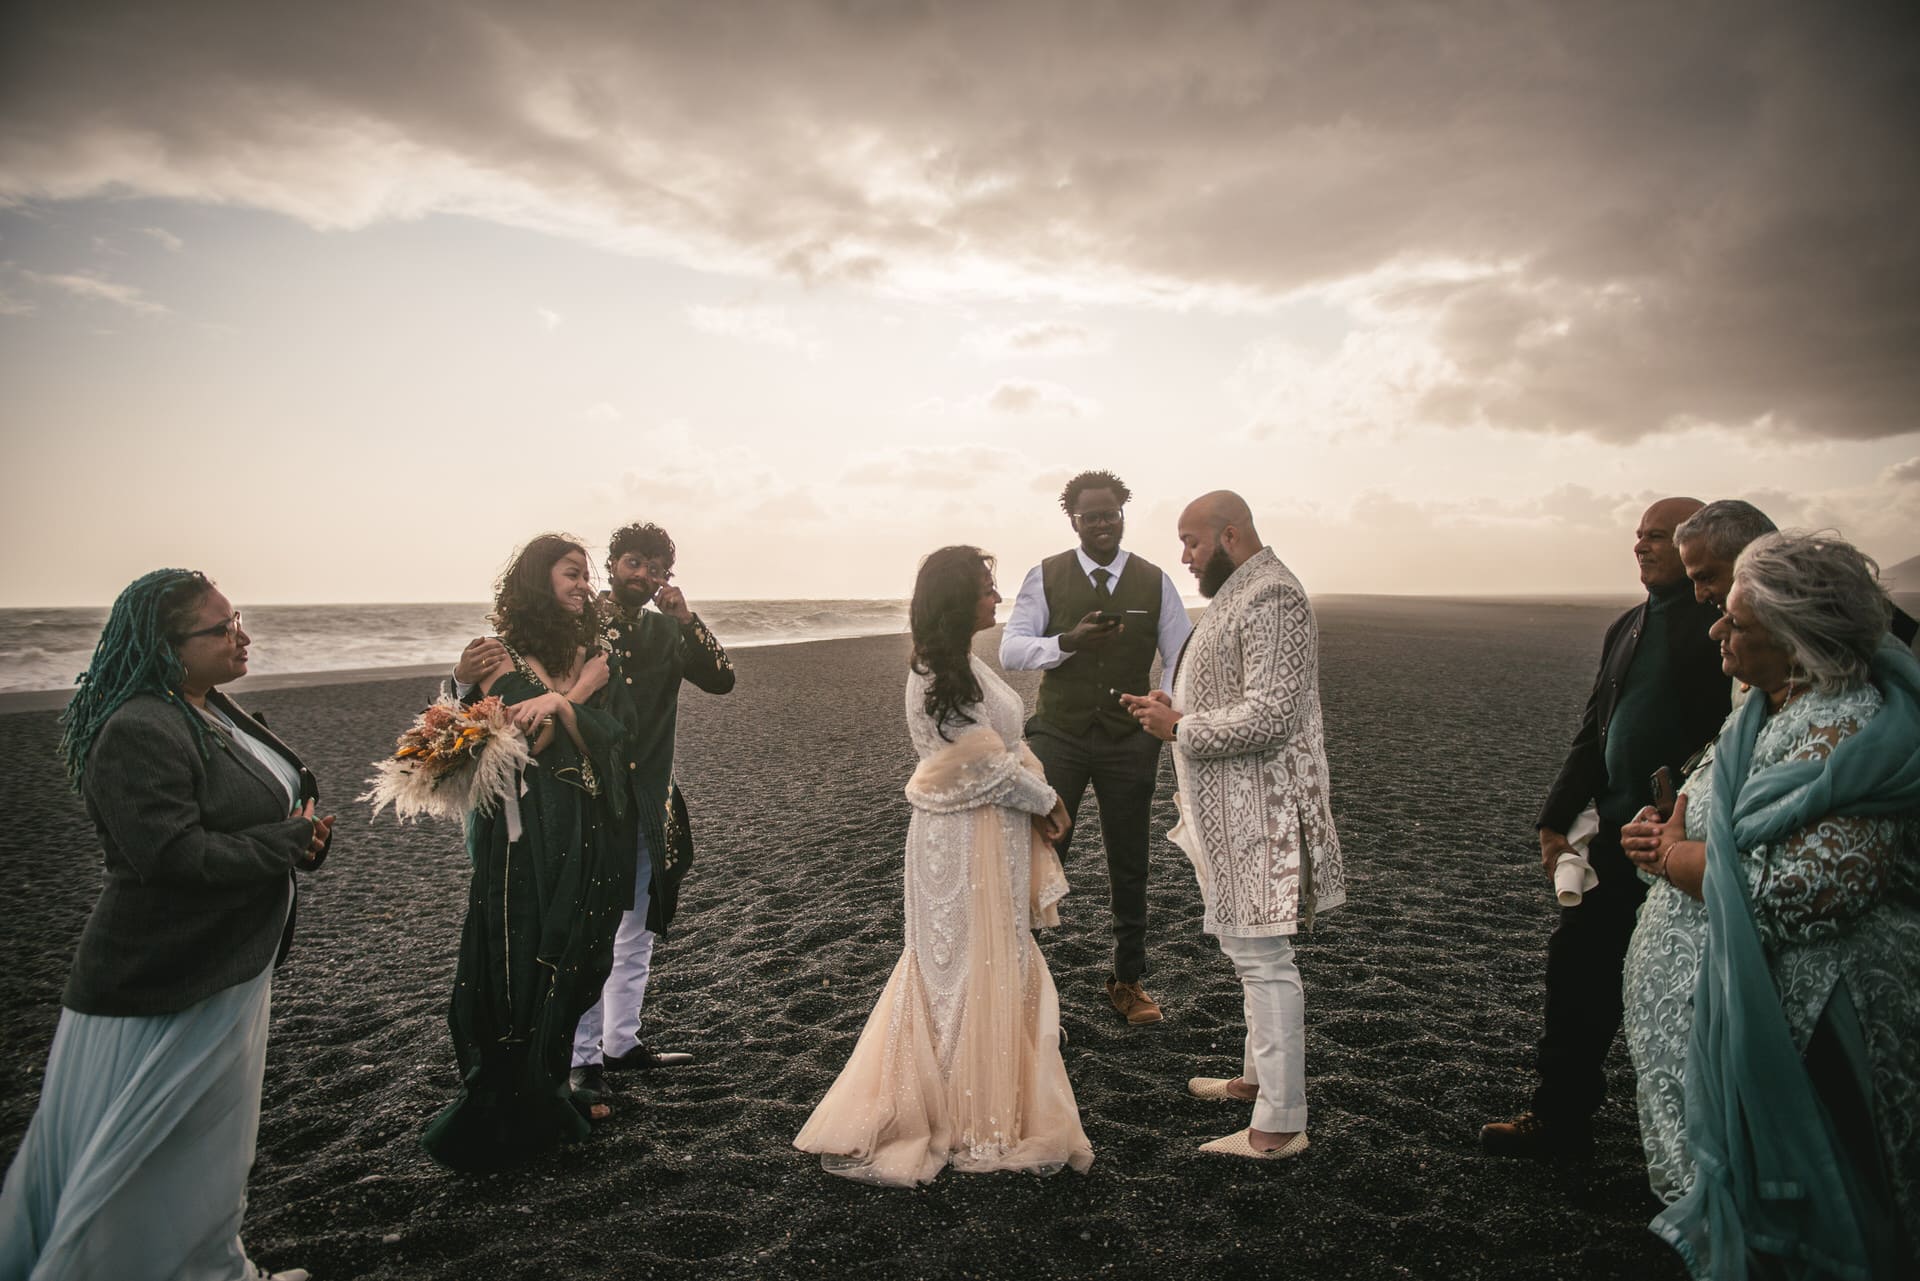 Natural beauty frames their East Iceland ceremony